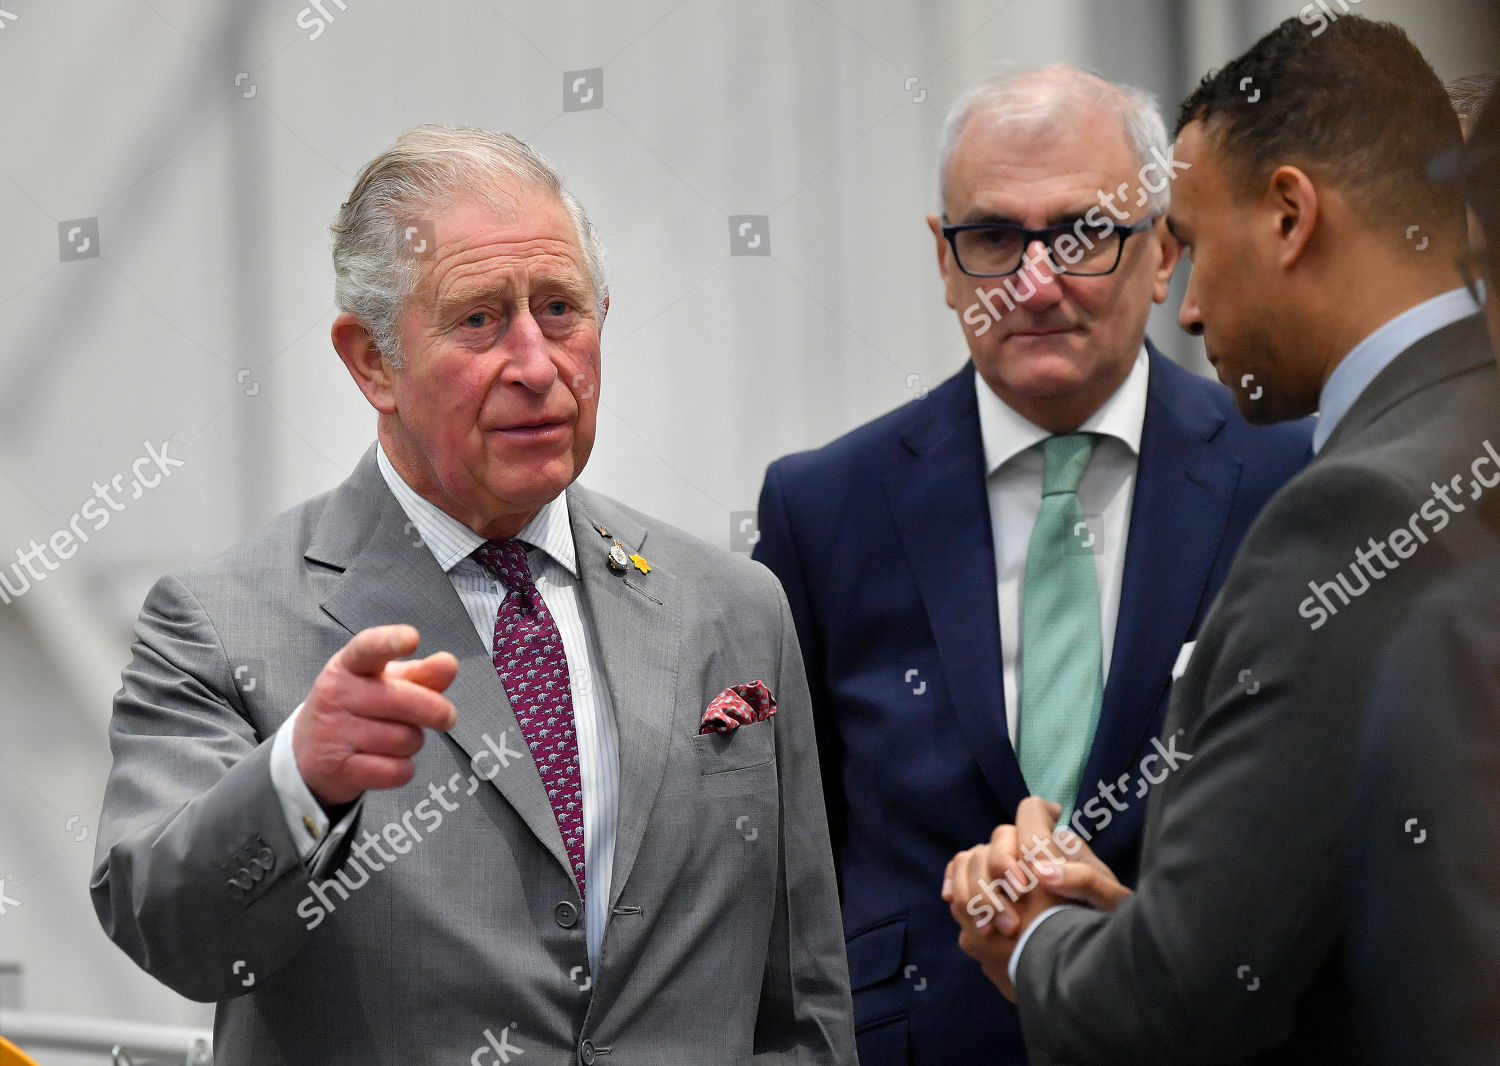 prince-charles-visit-to-south-wales-uk-shutterstock-editorial-10563131k.jpg